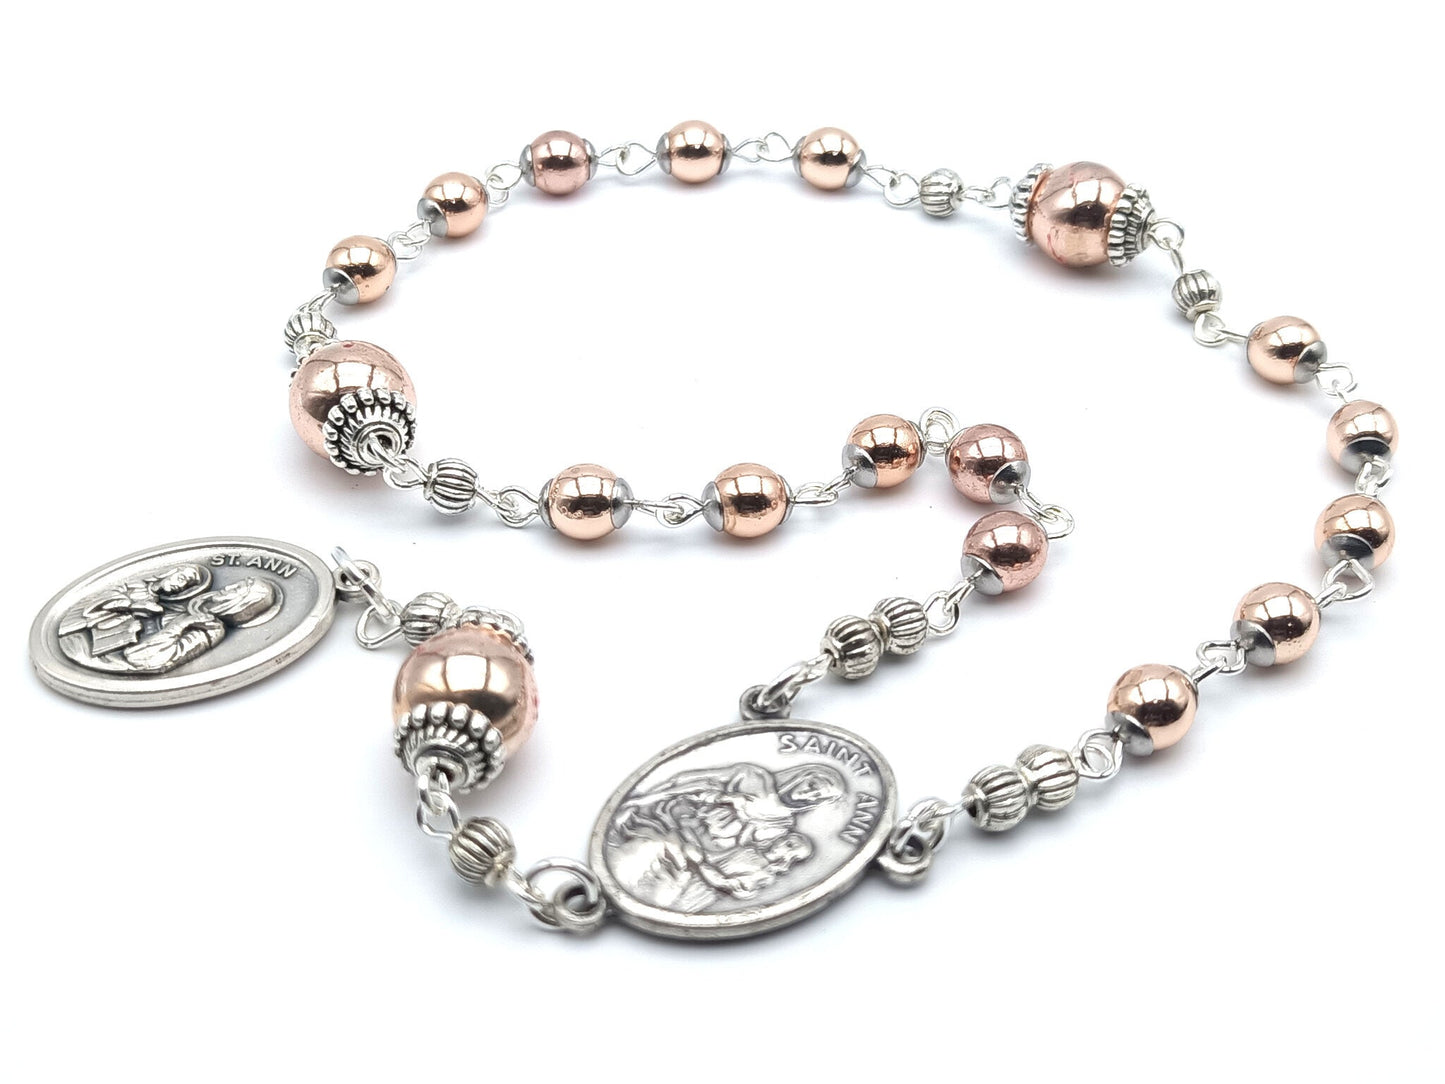 Saint Ann unique rosary beads prayer chaplet with rose gold gemstone beads, silver bead caps, Saint Ann centre and end medals.